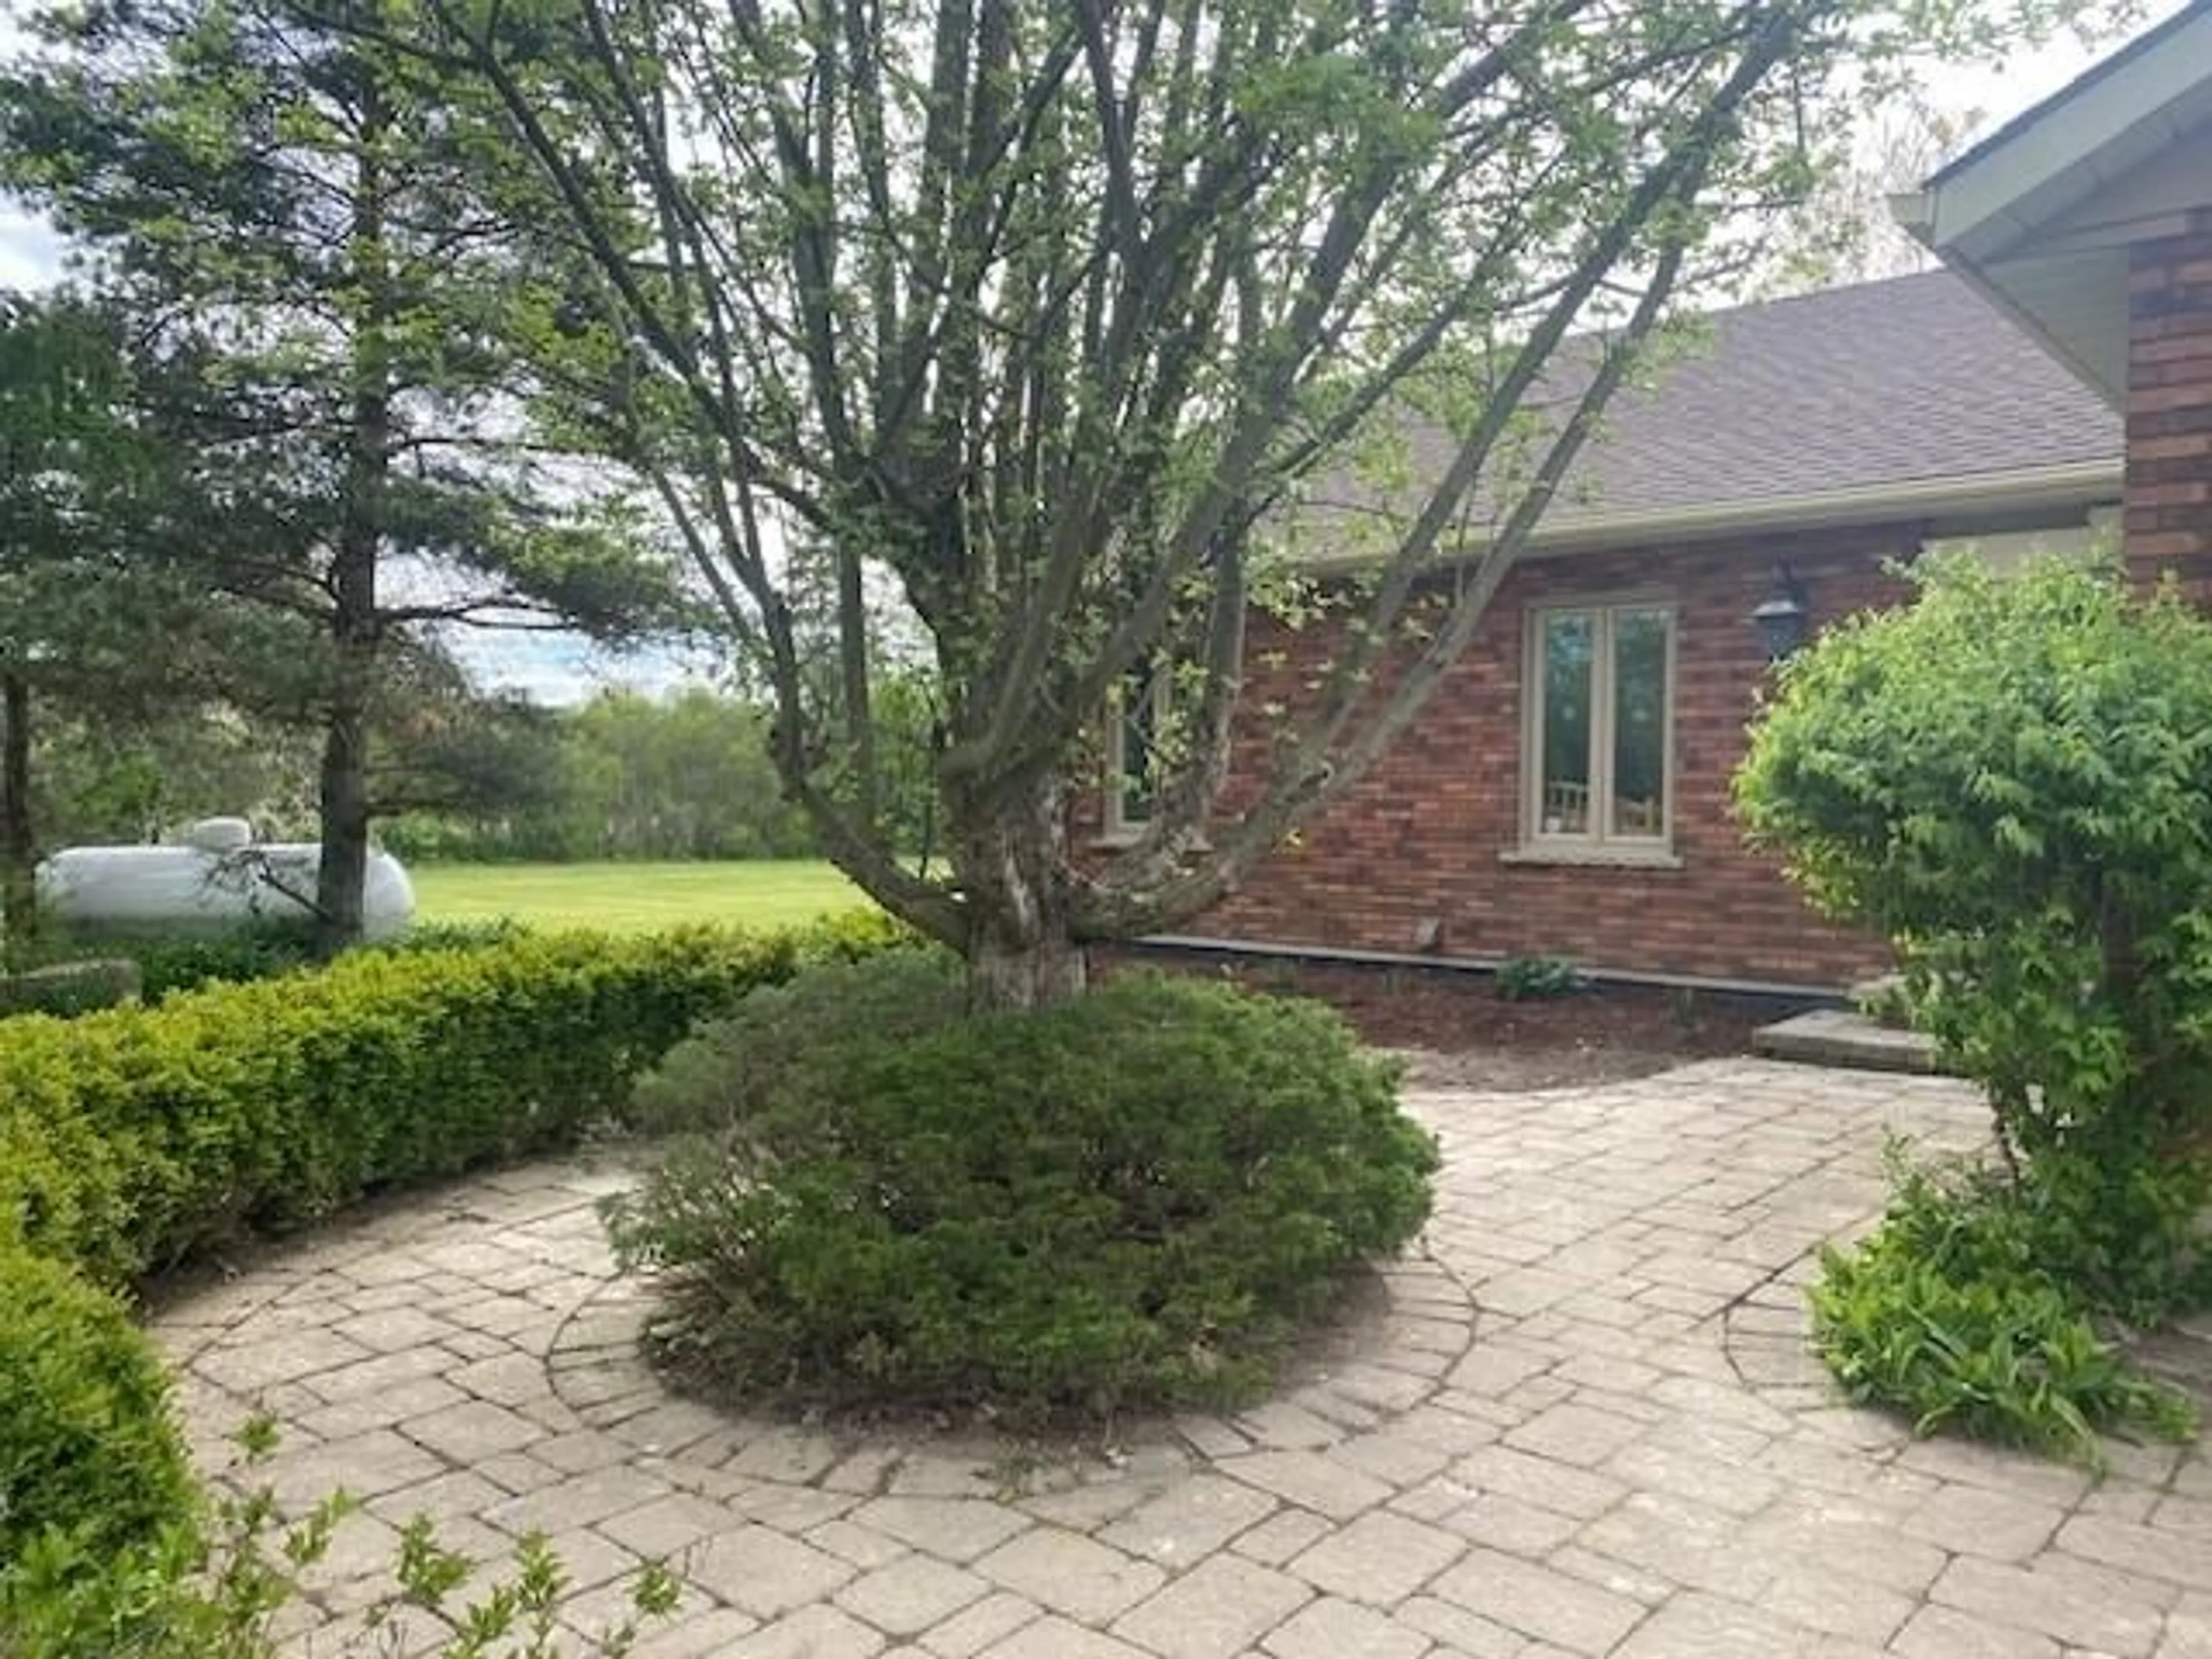 Home with brick exterior material for 120 PAULINE JOHNSON Rd, Caledonia Ontario N3W 2G9